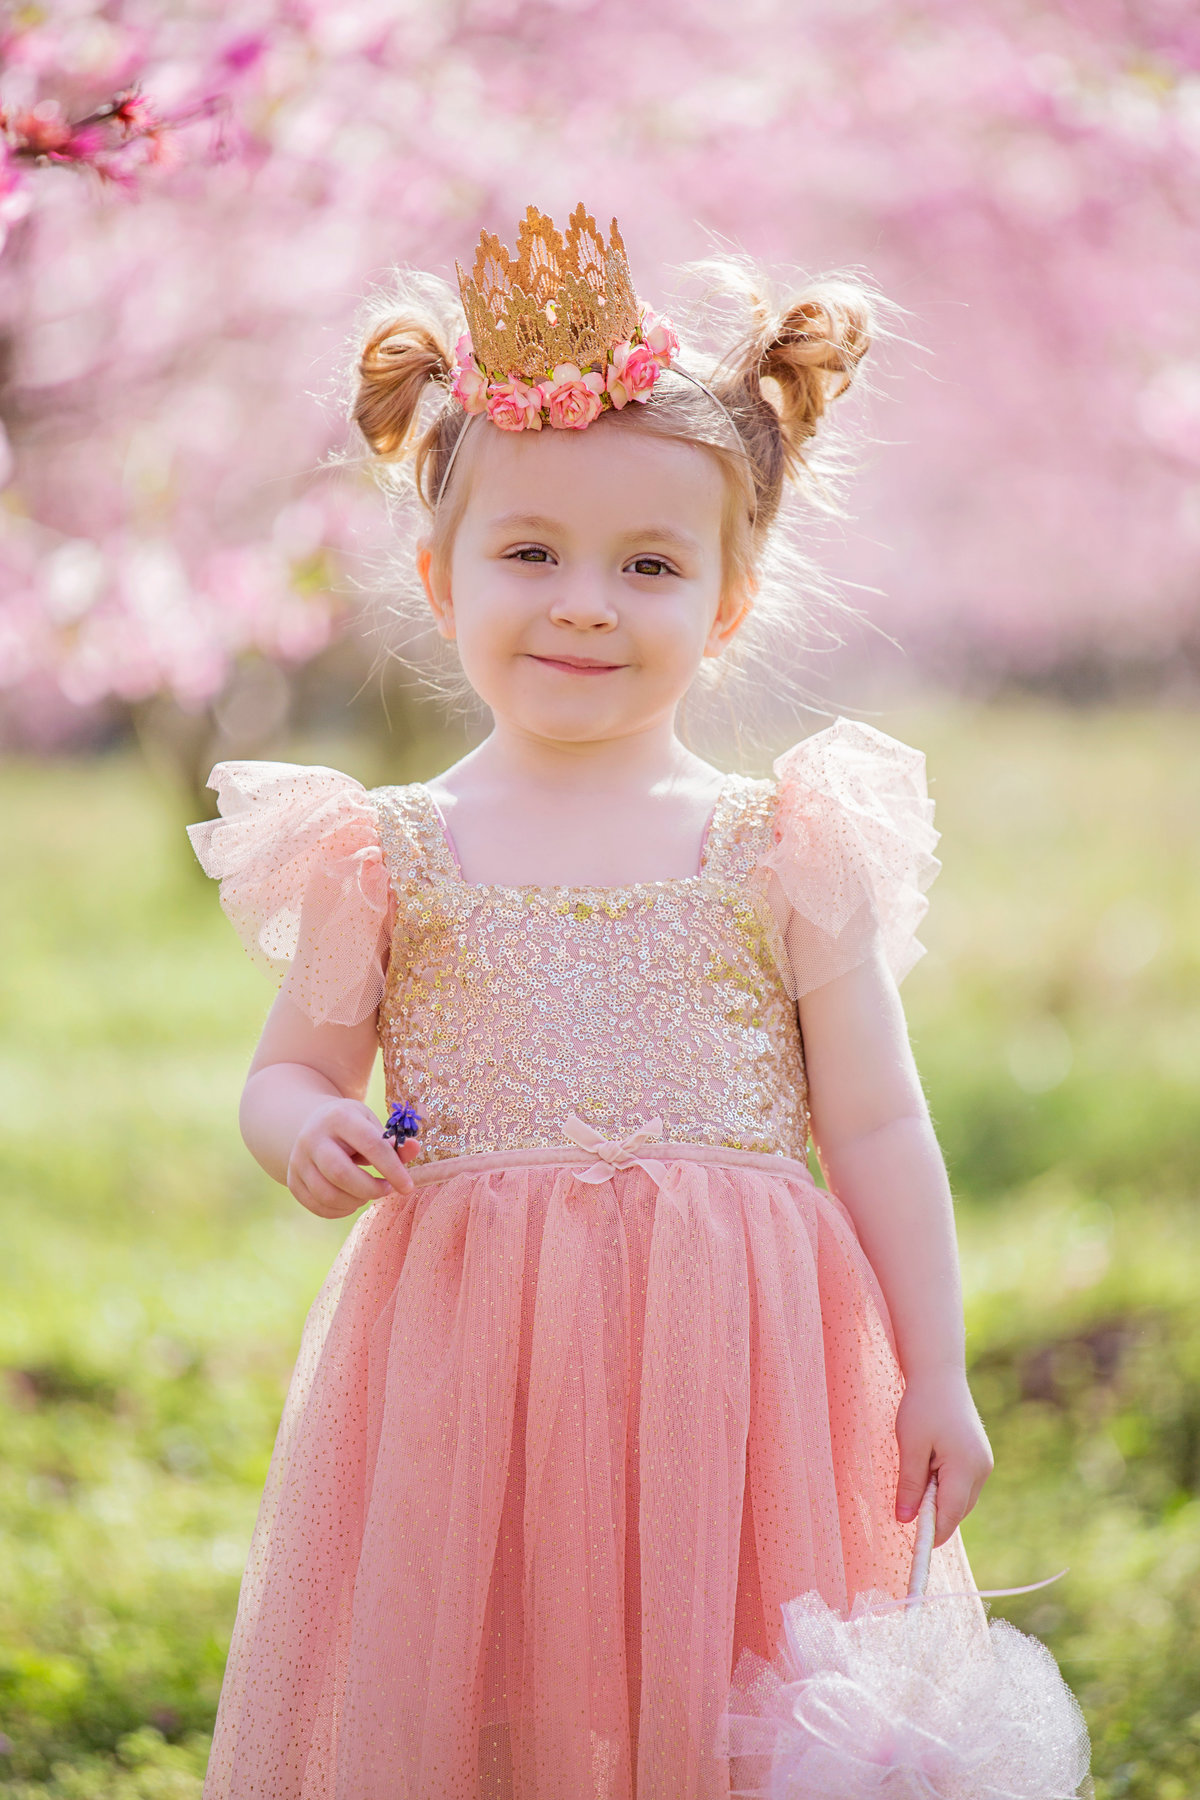 charlotte family photographer jamie lucido creates a beautiful styled image of a child in a princess dress at the cherry blossoms